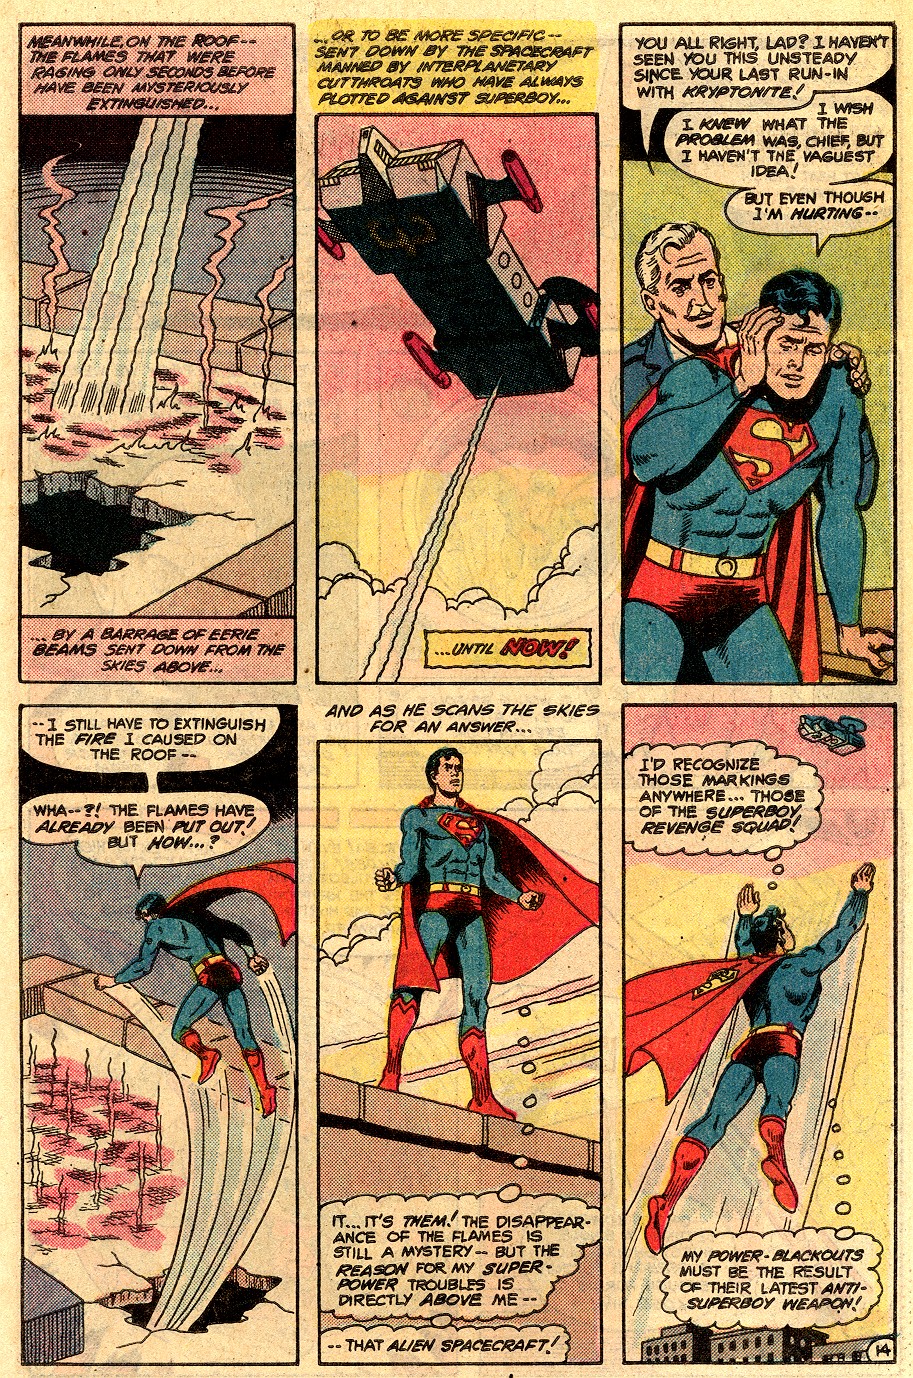 The New Adventures of Superboy 32 Page 18